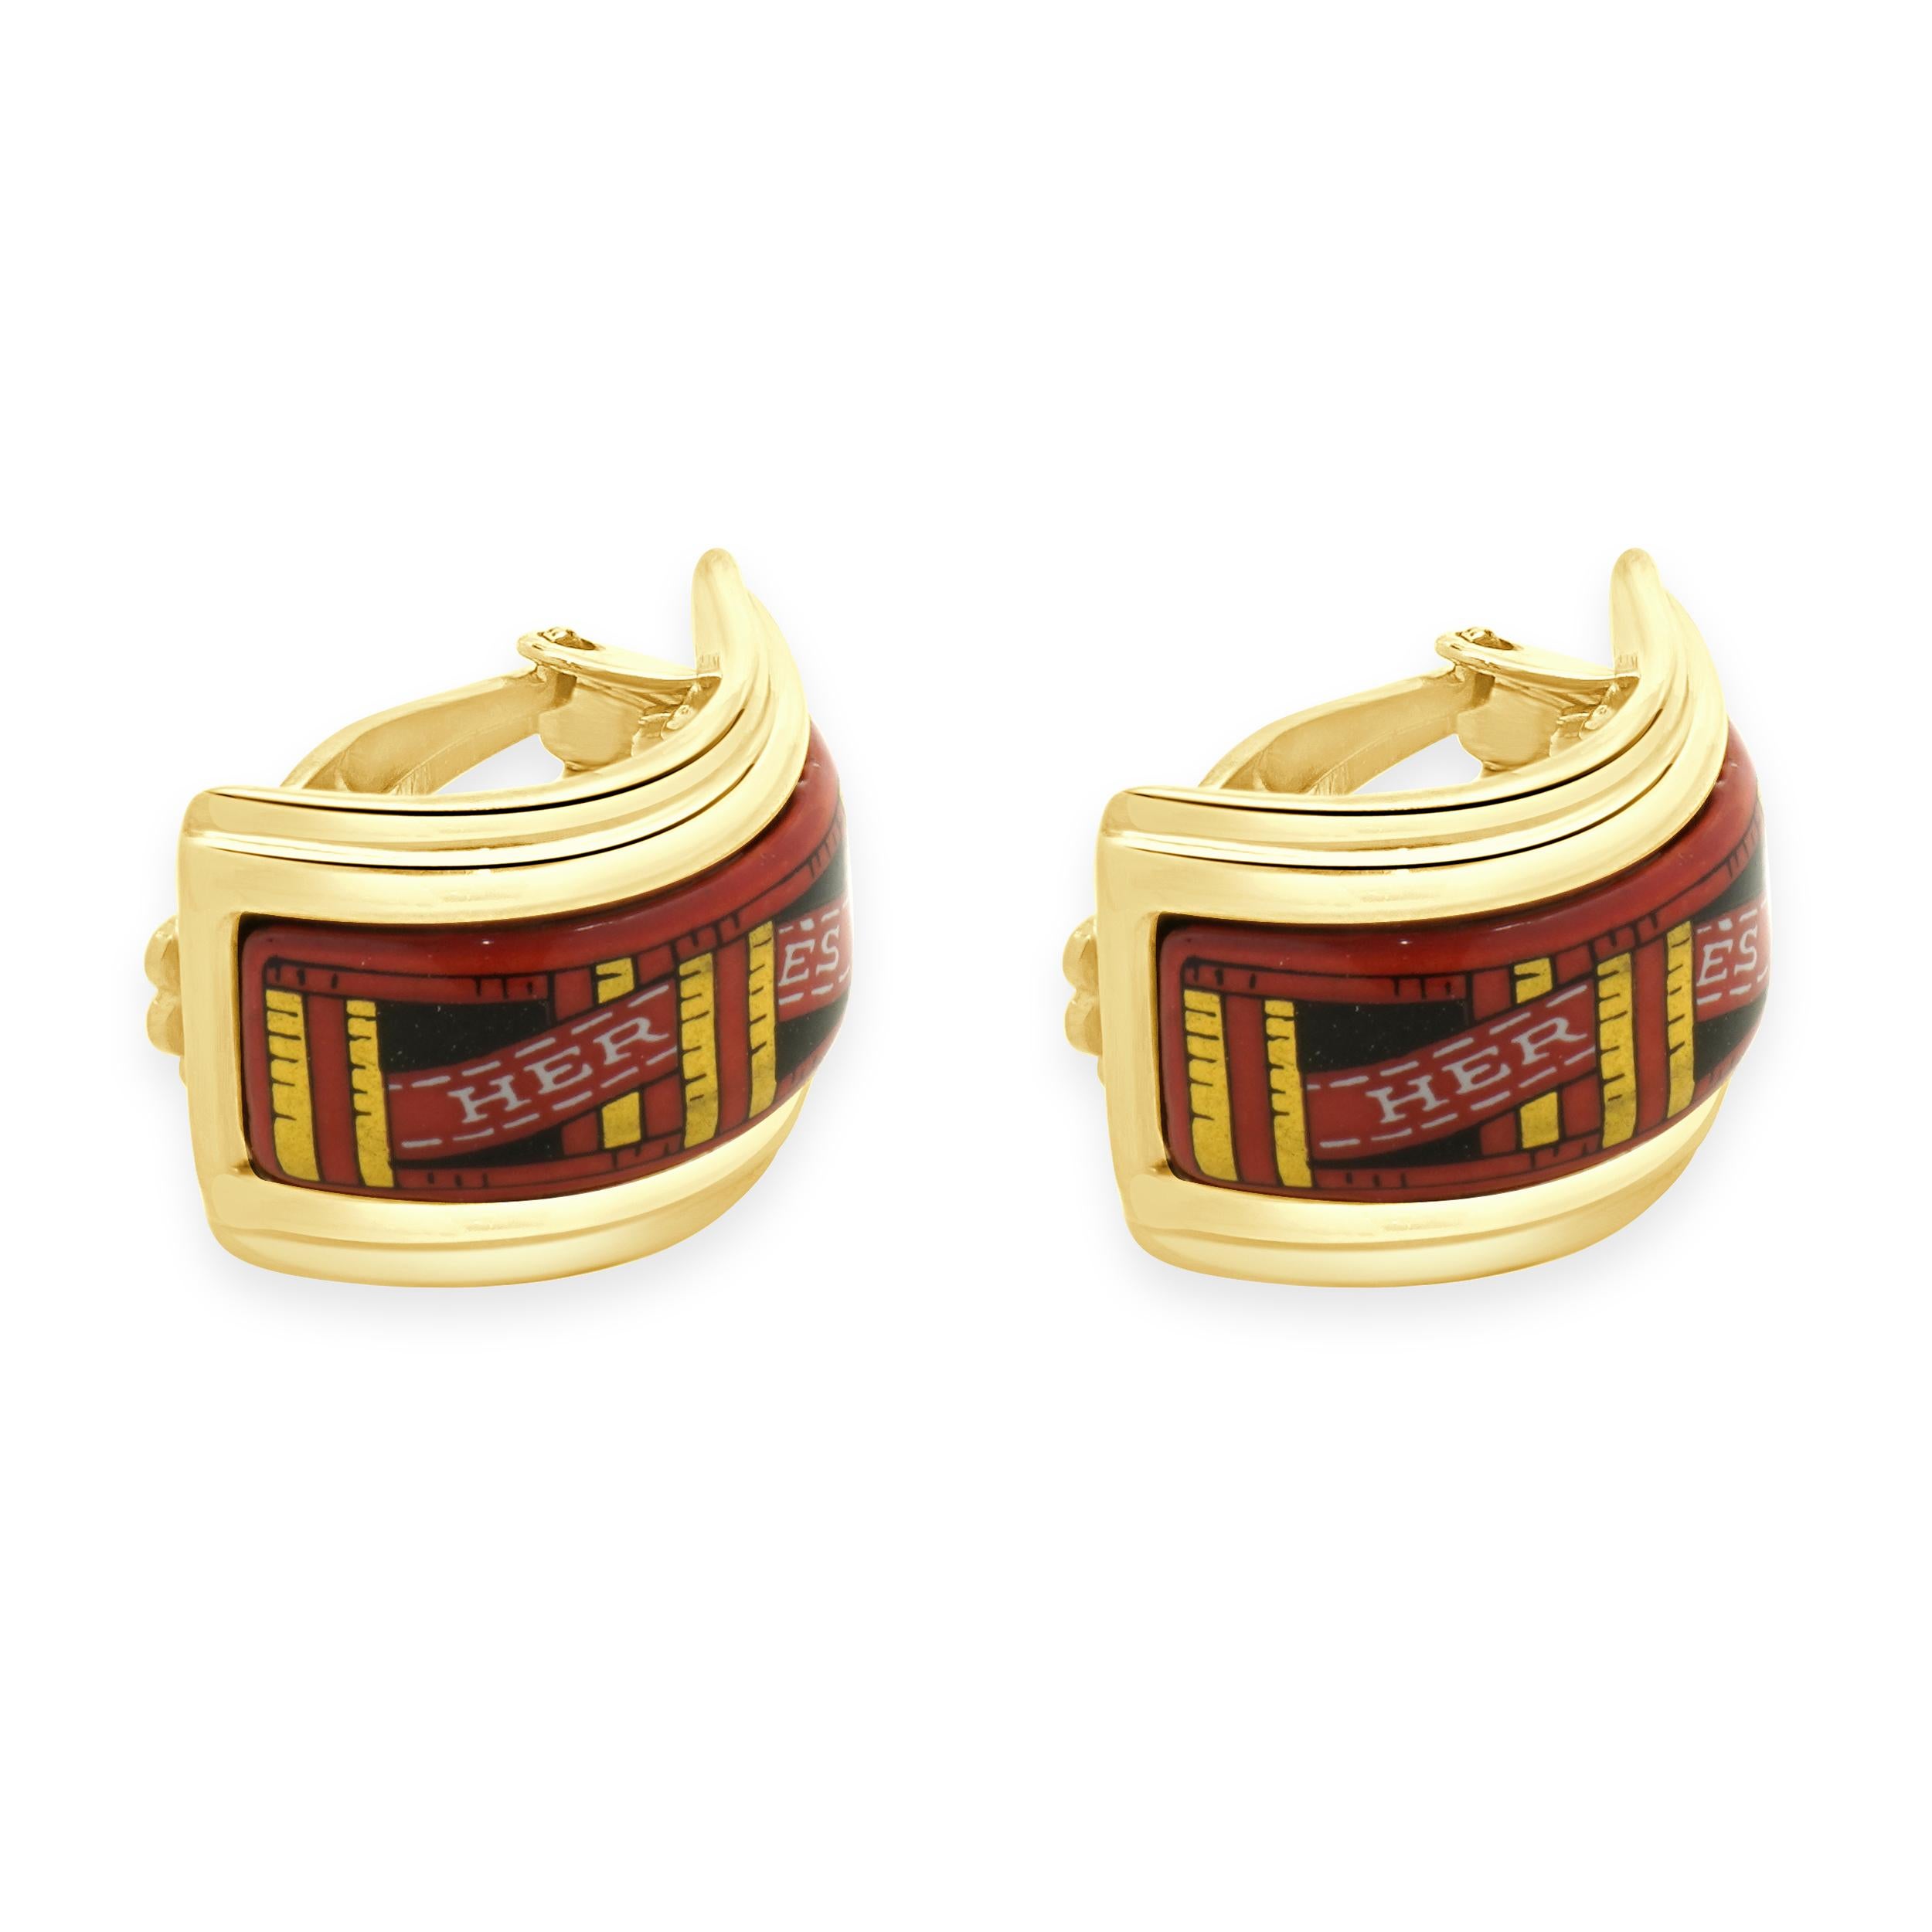 Hermes Gold Plated Enamel Clip On Earrings In Excellent Condition For Sale In Scottsdale, AZ